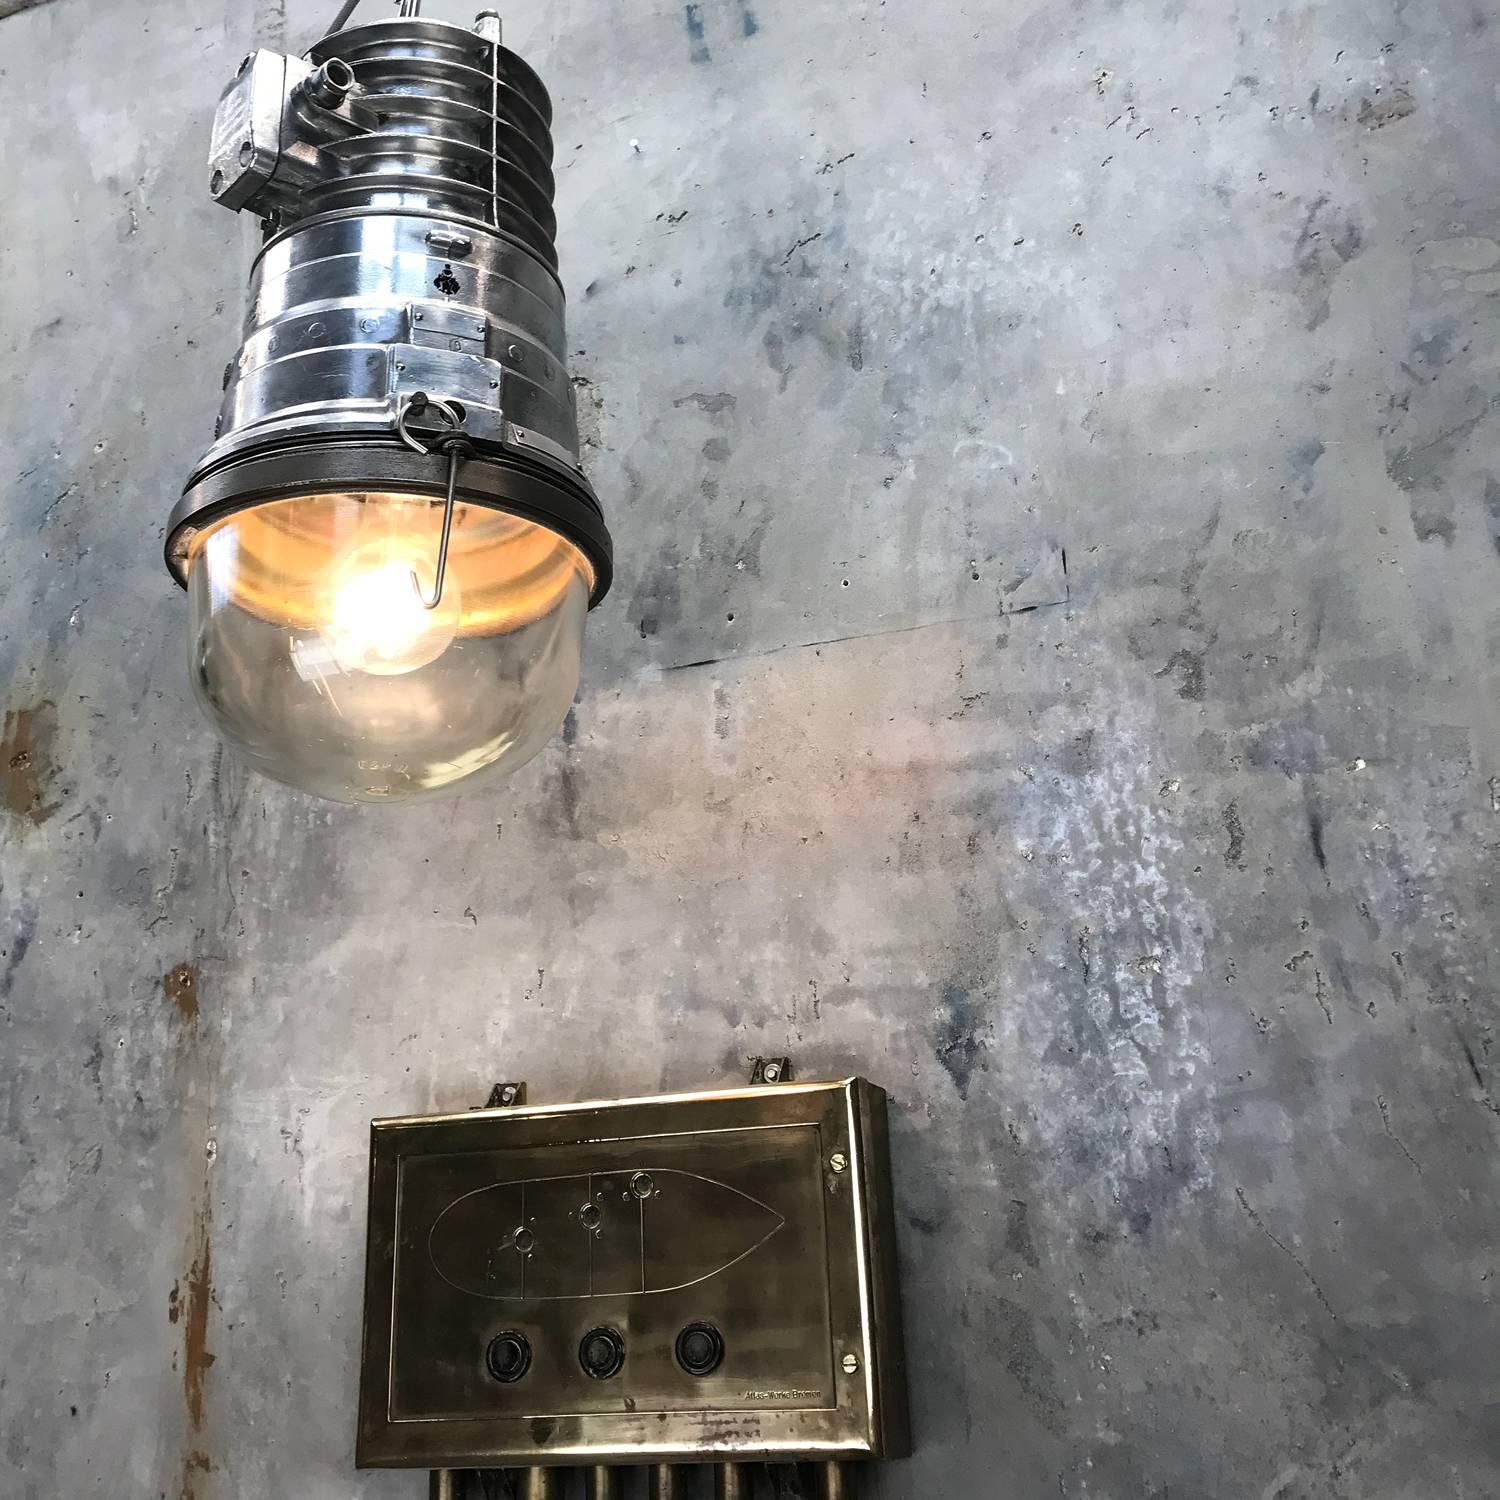 Industrial 1970s, German EOW Cast Aluminium Explosion Proof Pendant Tempered Glass Dome E40